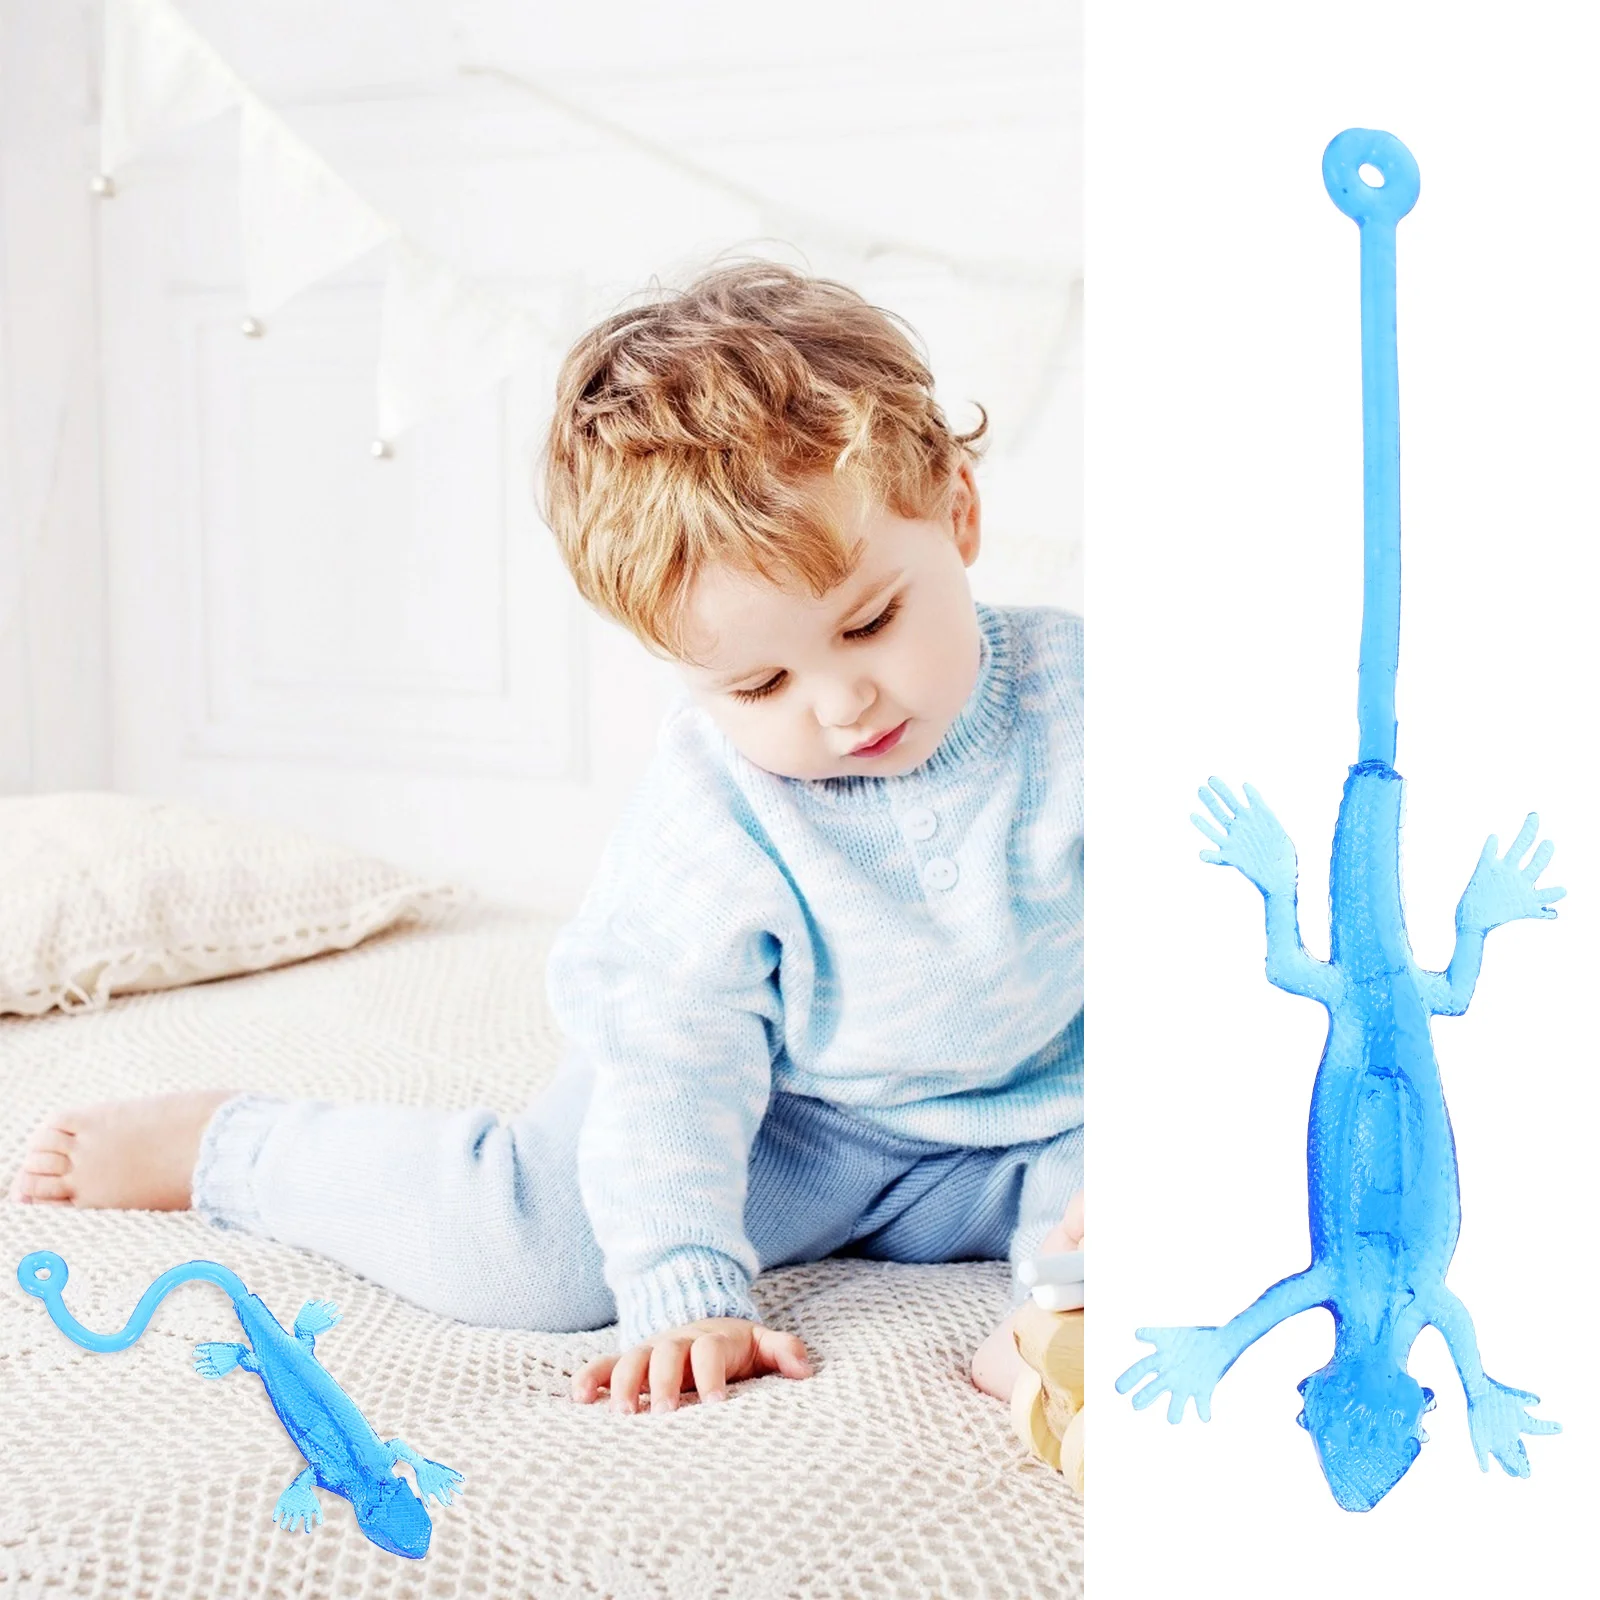 

Stickystretchy Lizard S Kids Party Gecko Animal Wall Reptile Favor Interactive Favors Lizards Animals Throw Hand